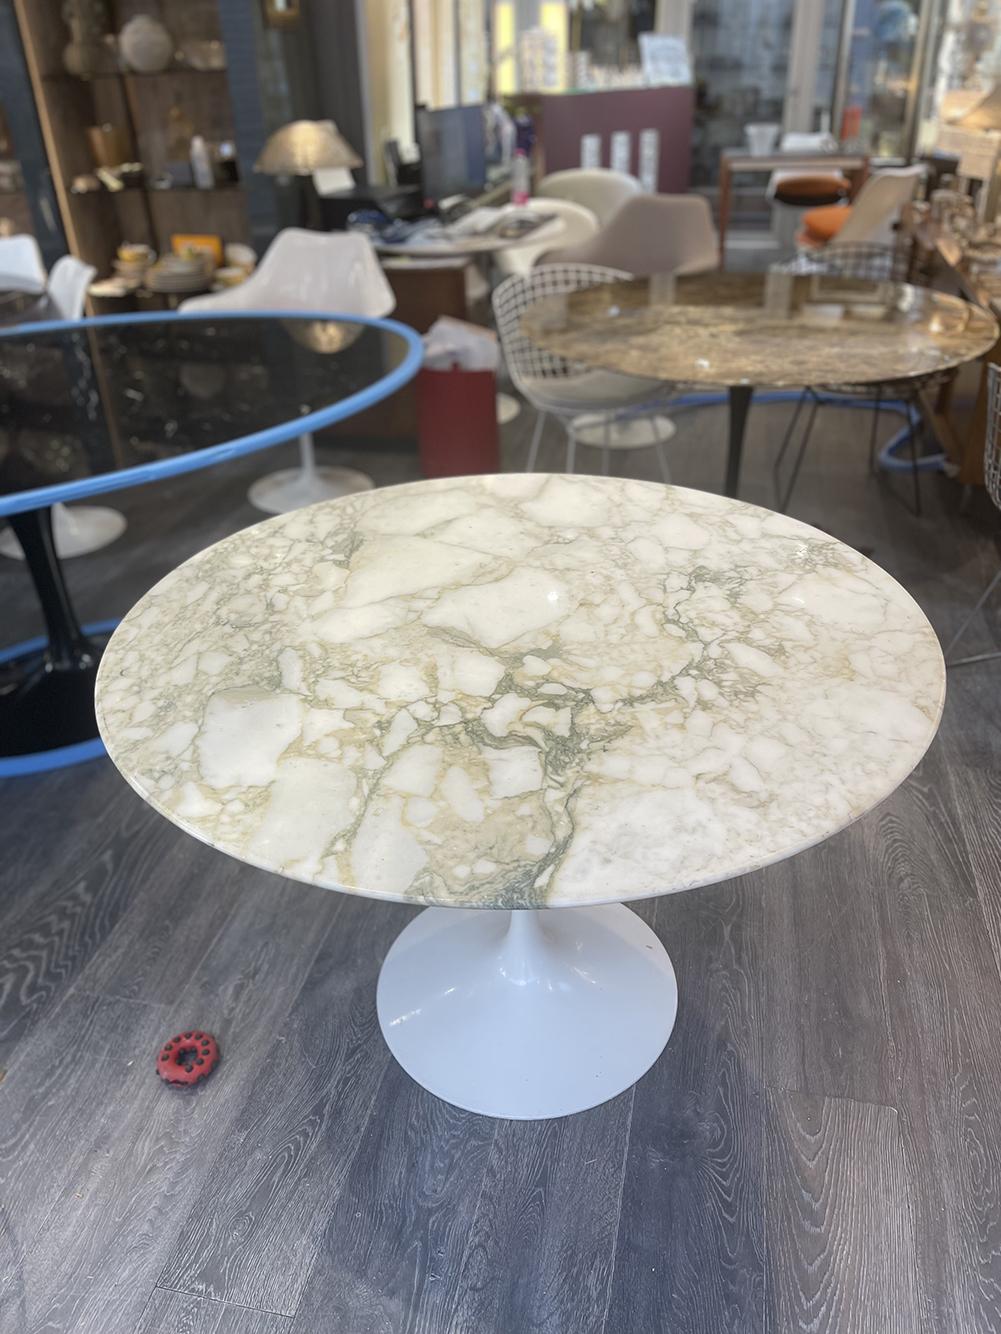 Eero SAARINEN for KNOLL International,
dining table,
white lacquered cast aluminum tulip base,
Calacatta oro verde marble top Marked under the base.
Dimension :
D: 107cm
Height: 72cm.

More photos on request.
Worldwide delivery with quote